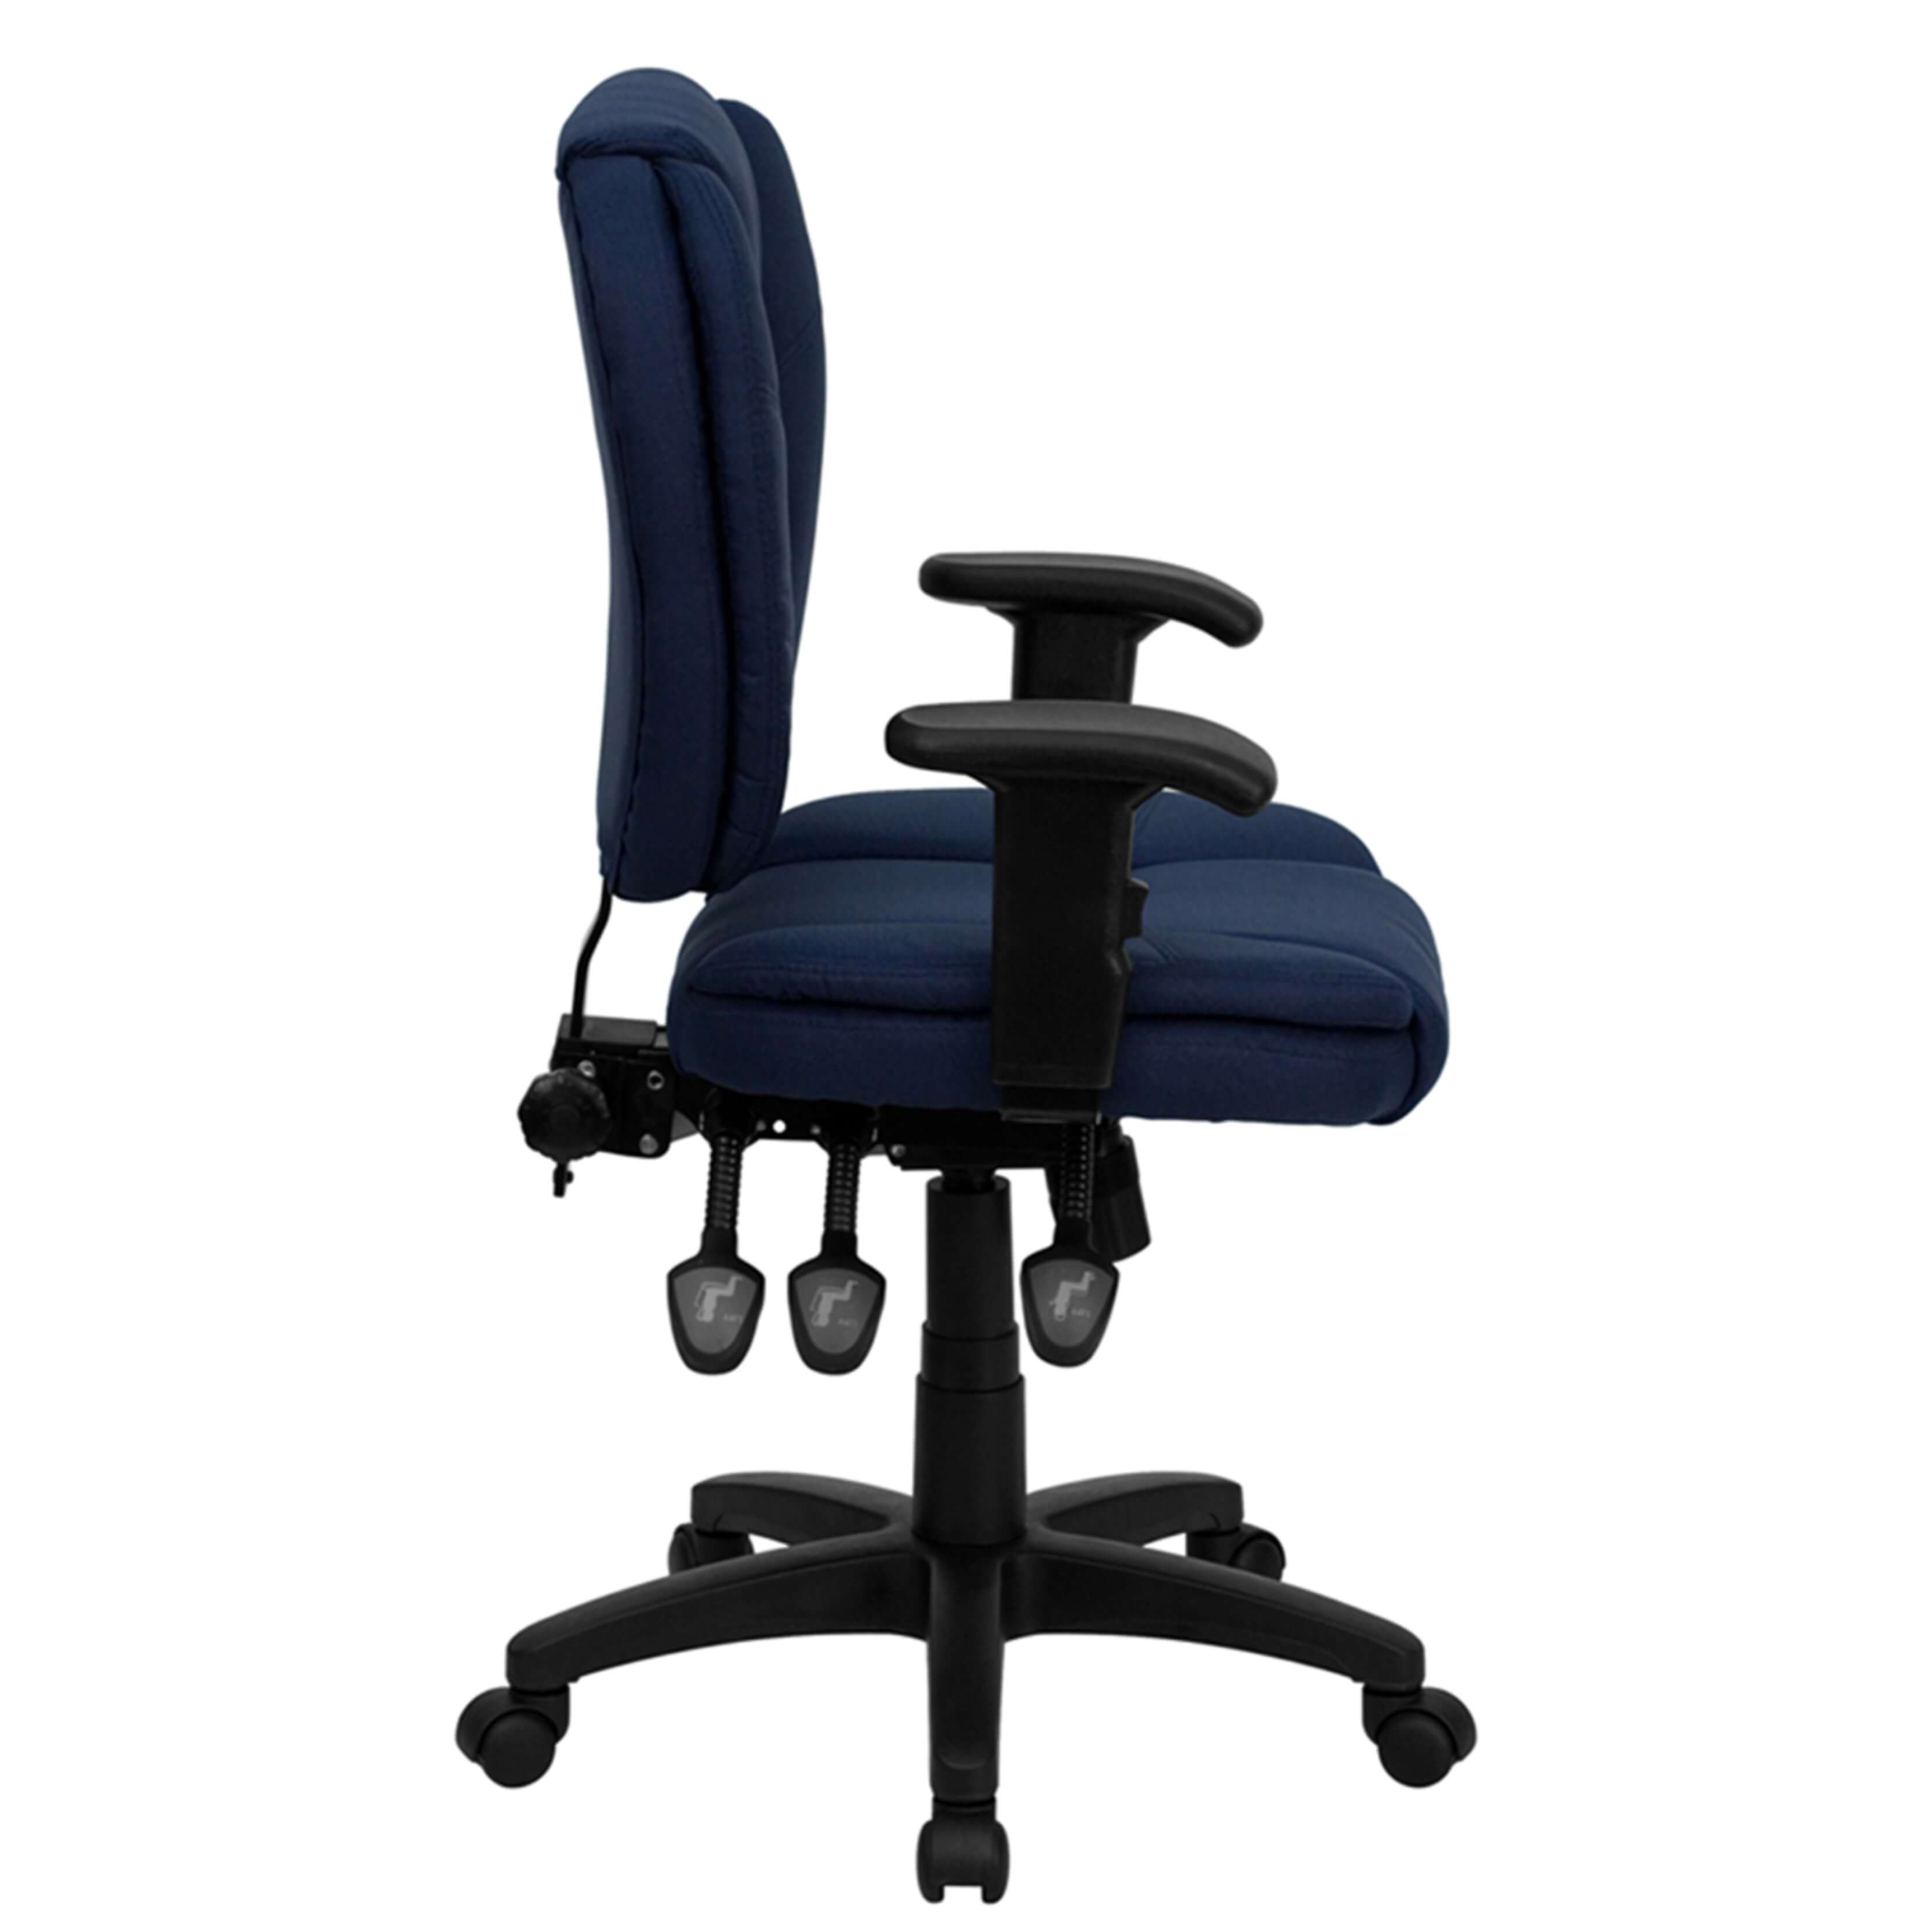 Traditional office chair side view